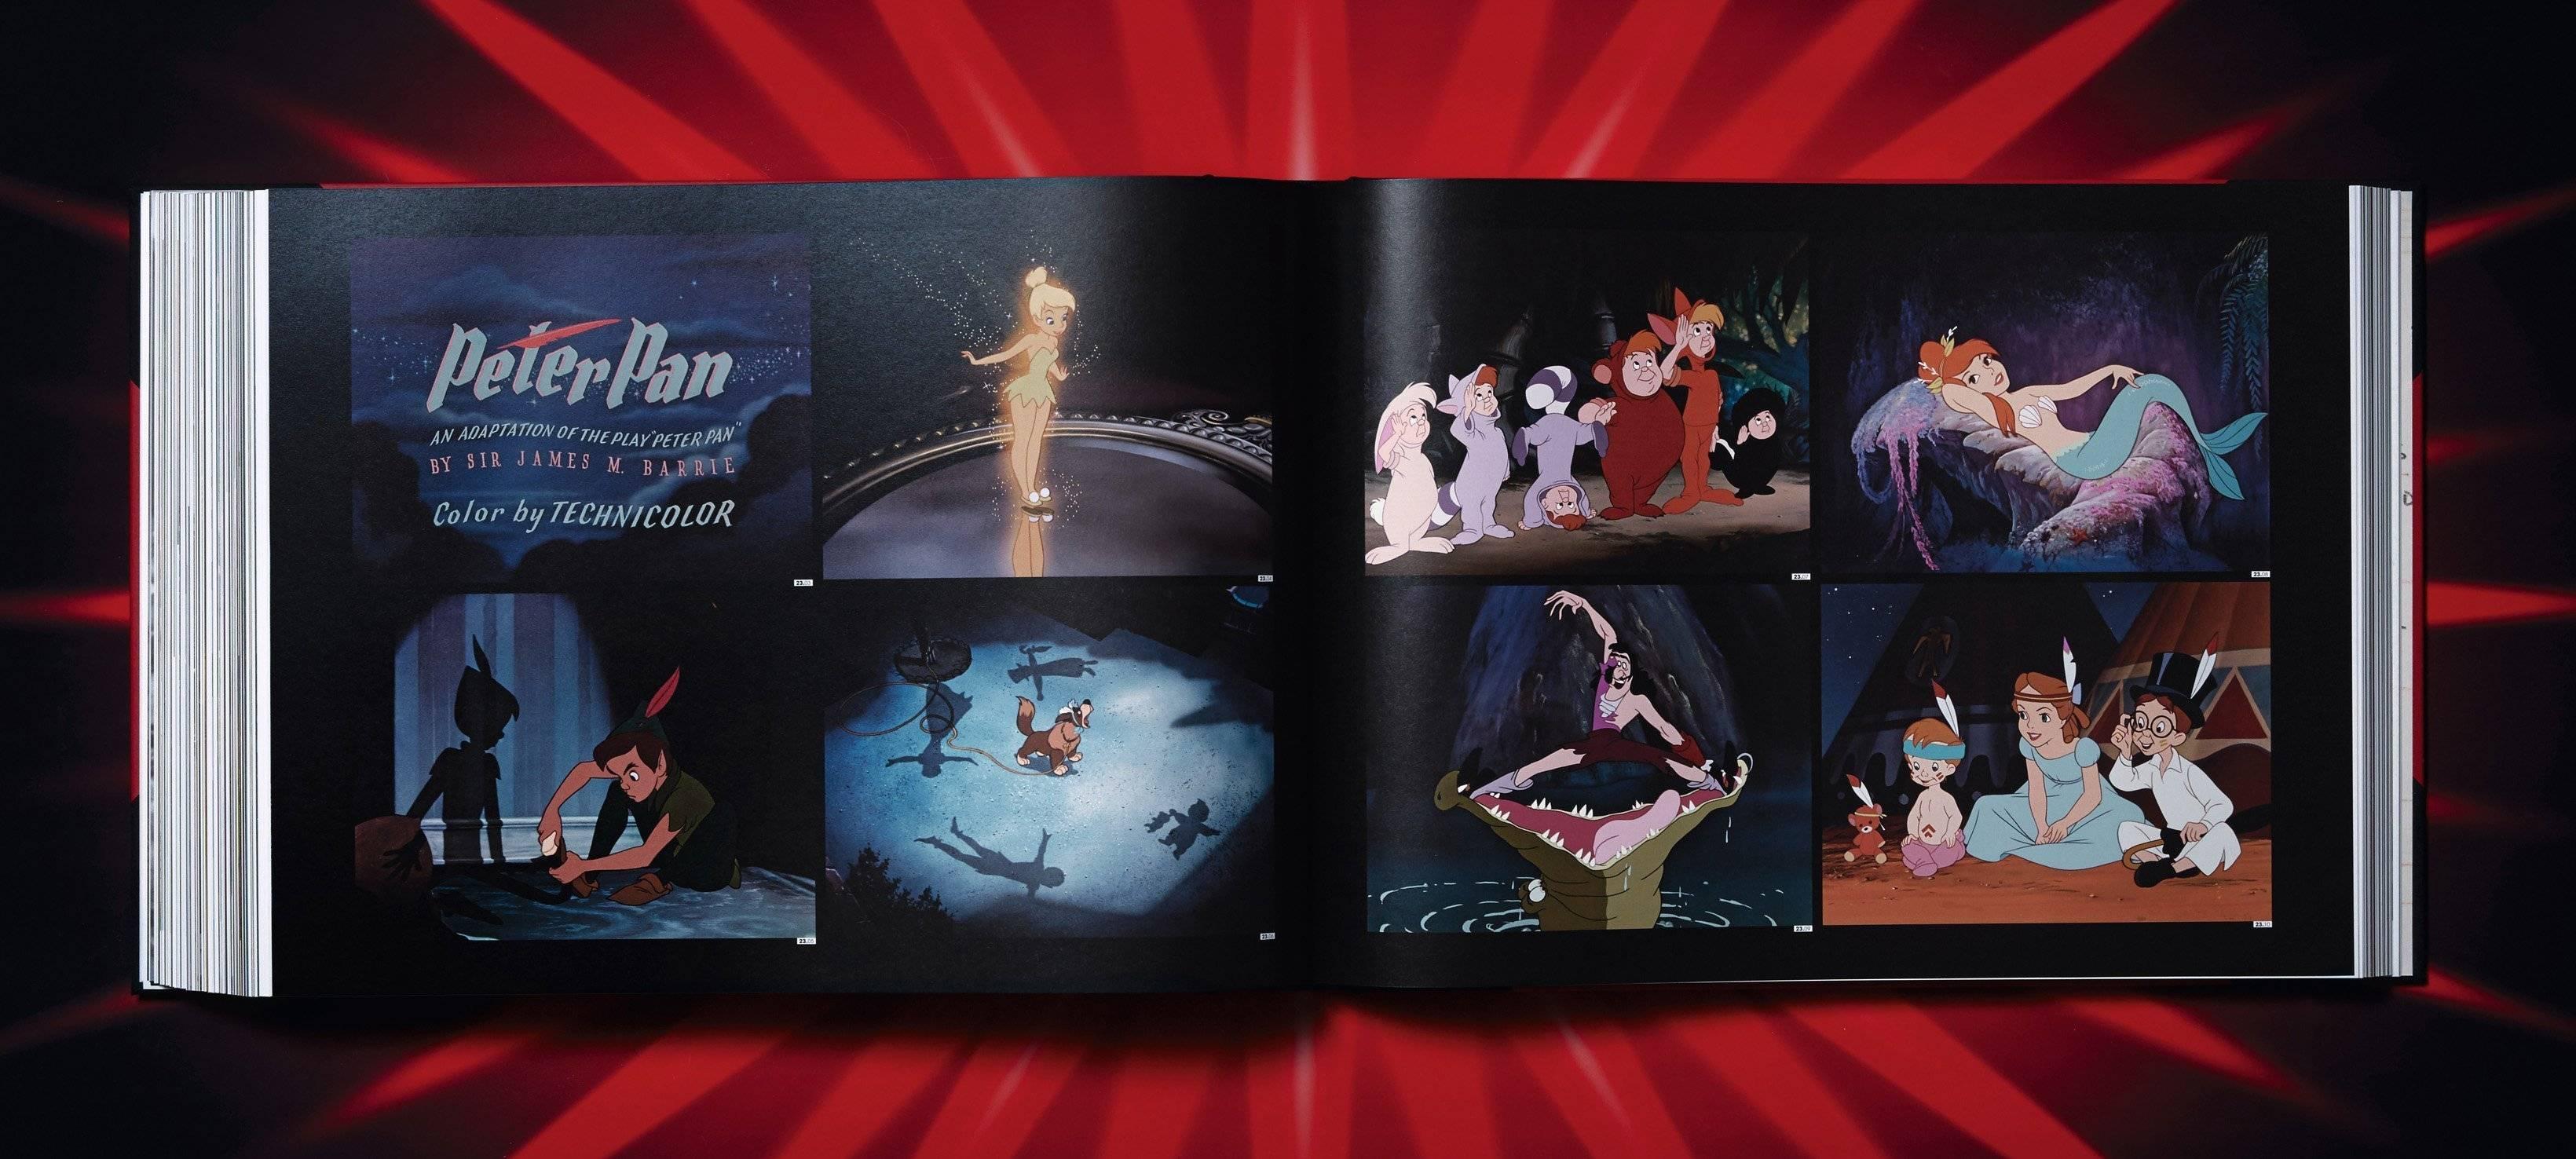 Contemporary Walt Disney Film Archives, the Animated Movies, 1921-1968